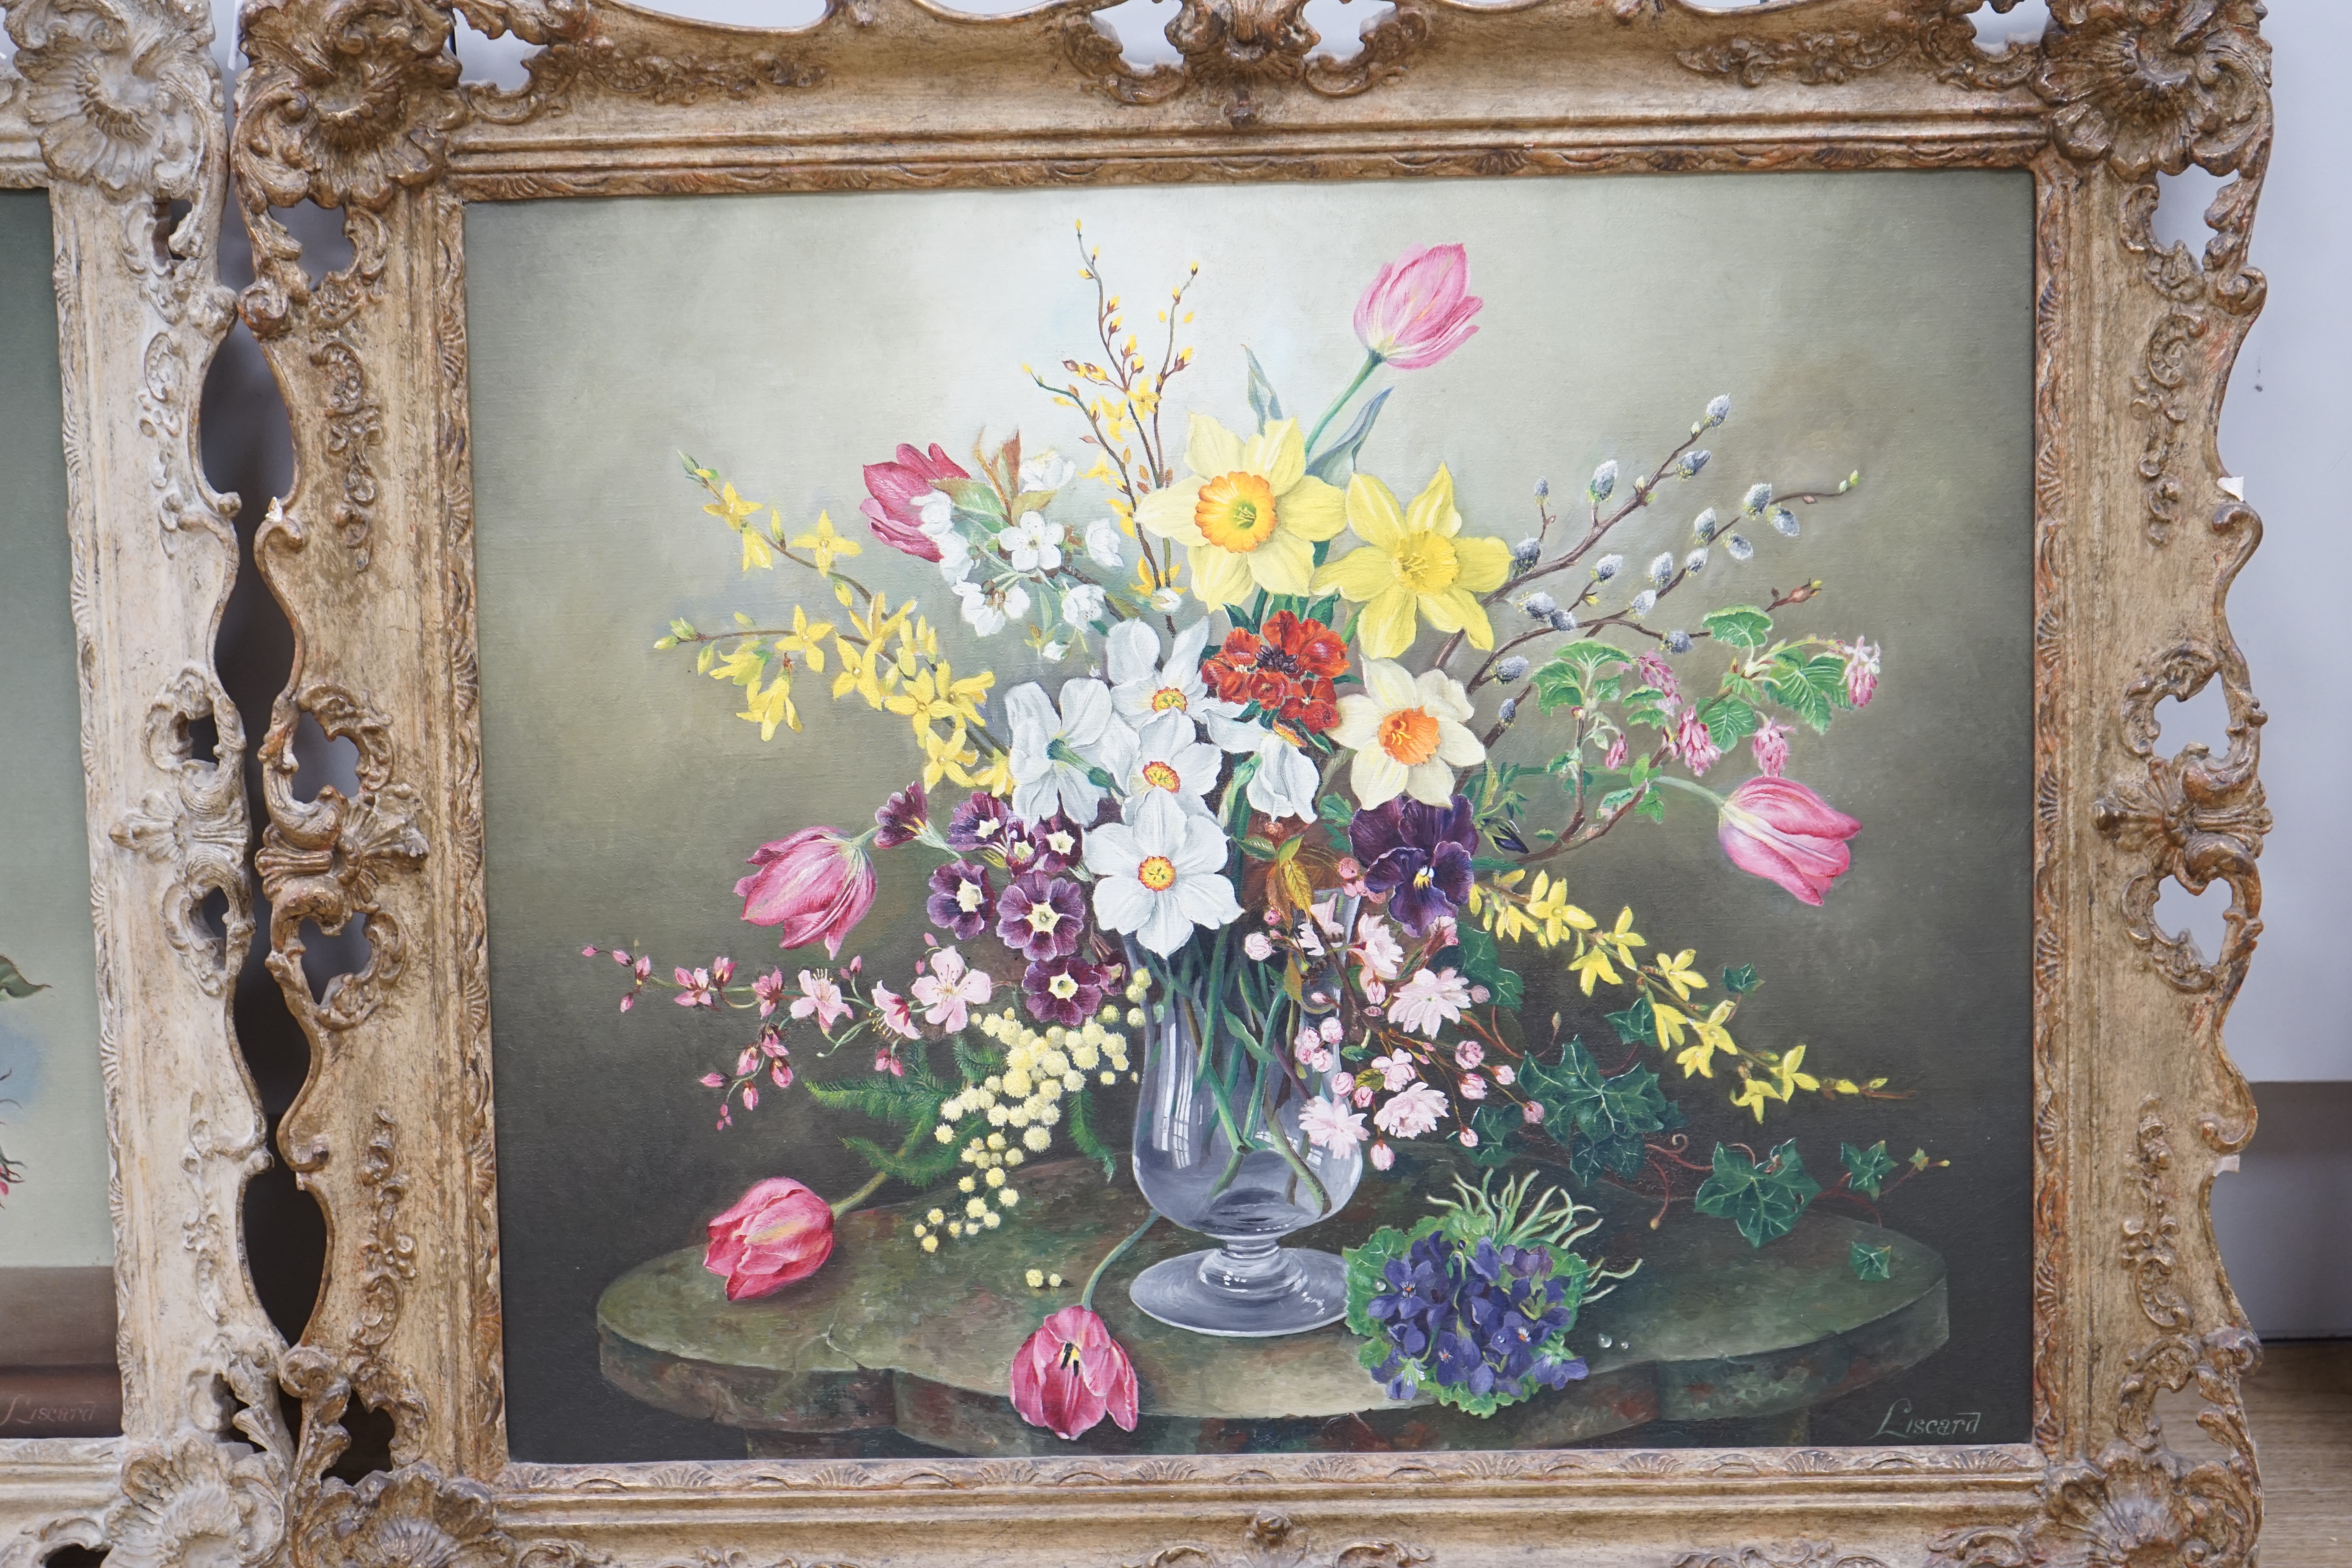 Eustace Liscard (20th. C), two oils on canvas, Still lifes of flowers comprising ‘Lovely is the rose’ and one other, each signed, largest 49 x 59cm. Condition - good, some losses to the frames